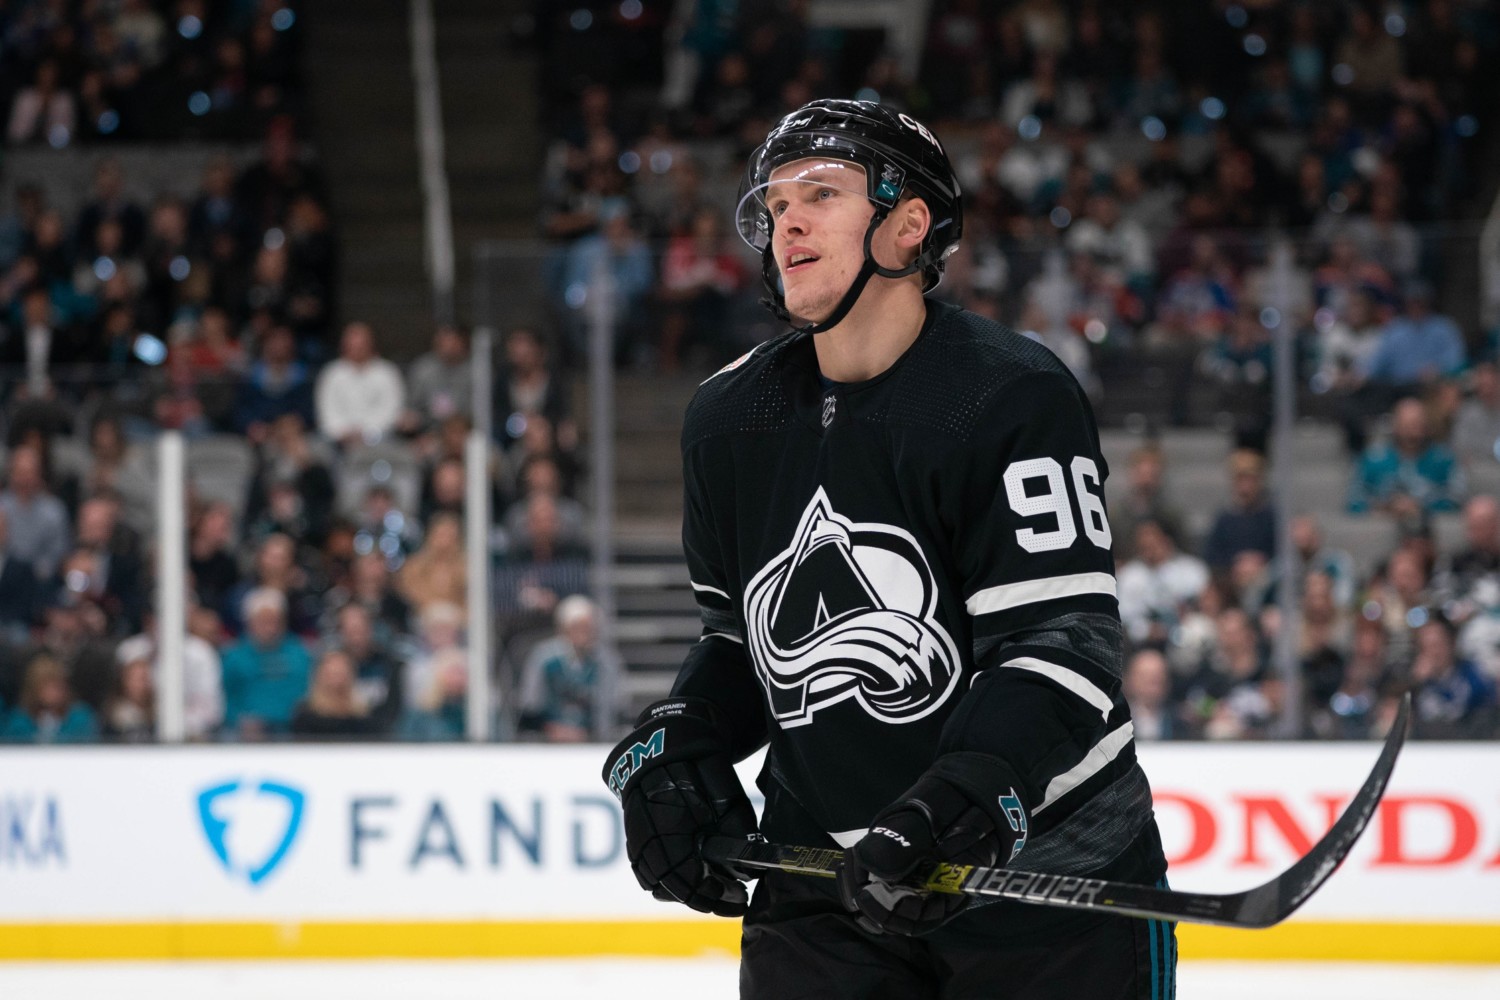 Mikko Rantanen on his way to returning while Taylor Hall and Connor McDavid get good news.